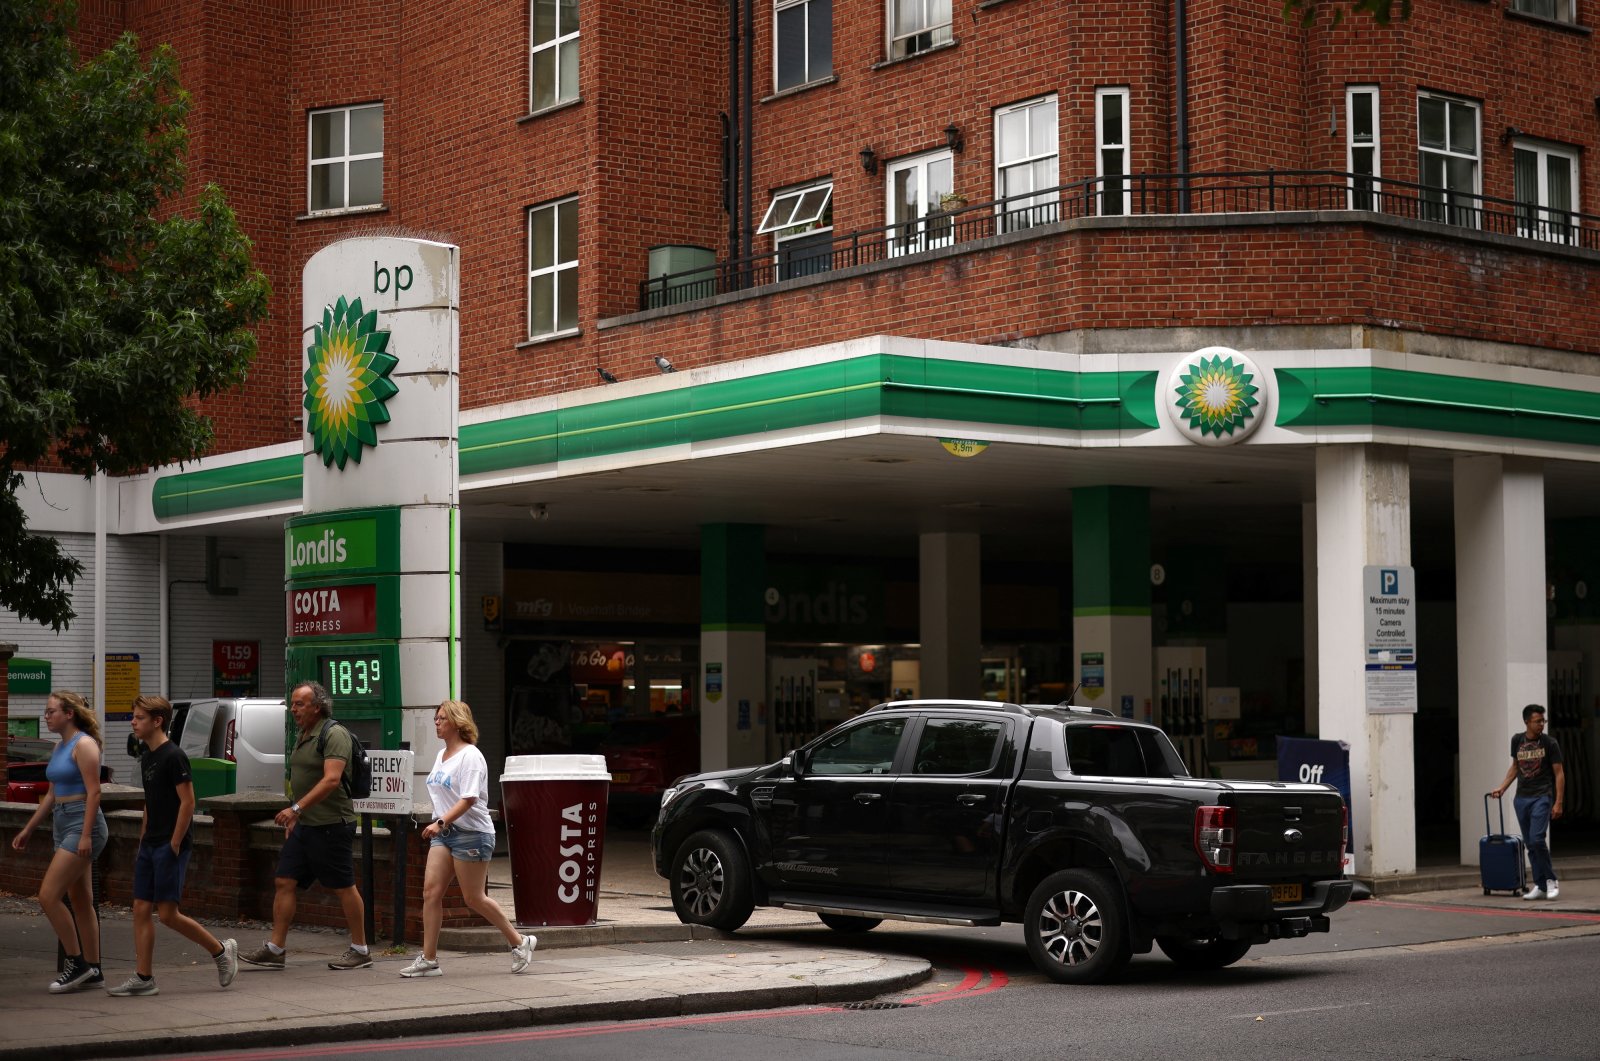 A vehicle enters a BP petrol station in central London, Britain, Aug. 2, 2022. (Reuters Photo)